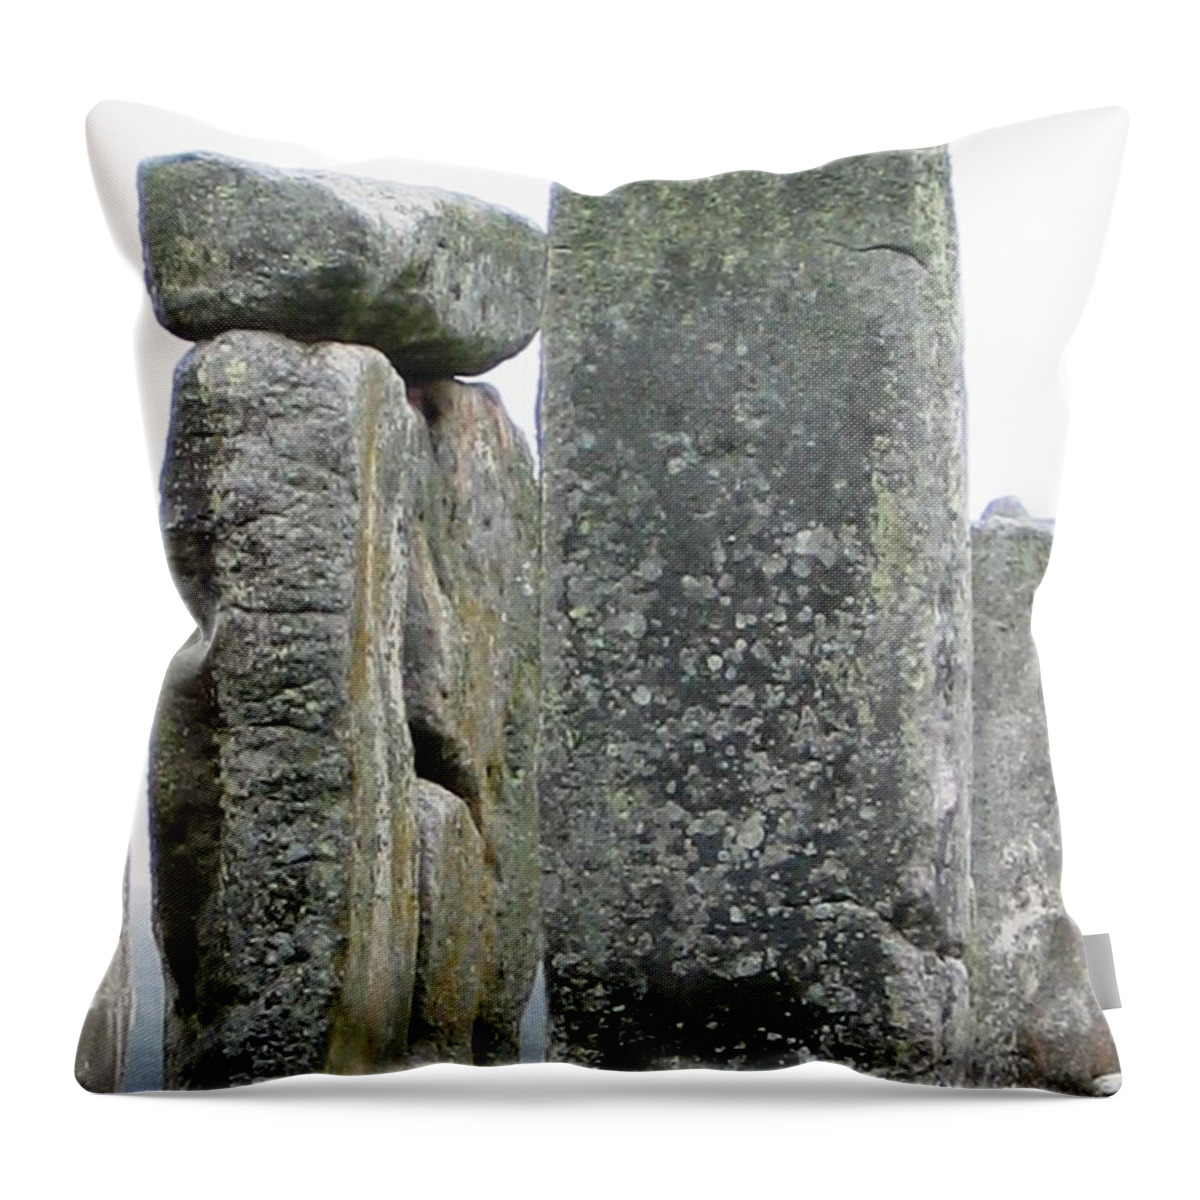 Stonehenge Throw Pillow featuring the photograph Pockmarked With Age by Denise Railey